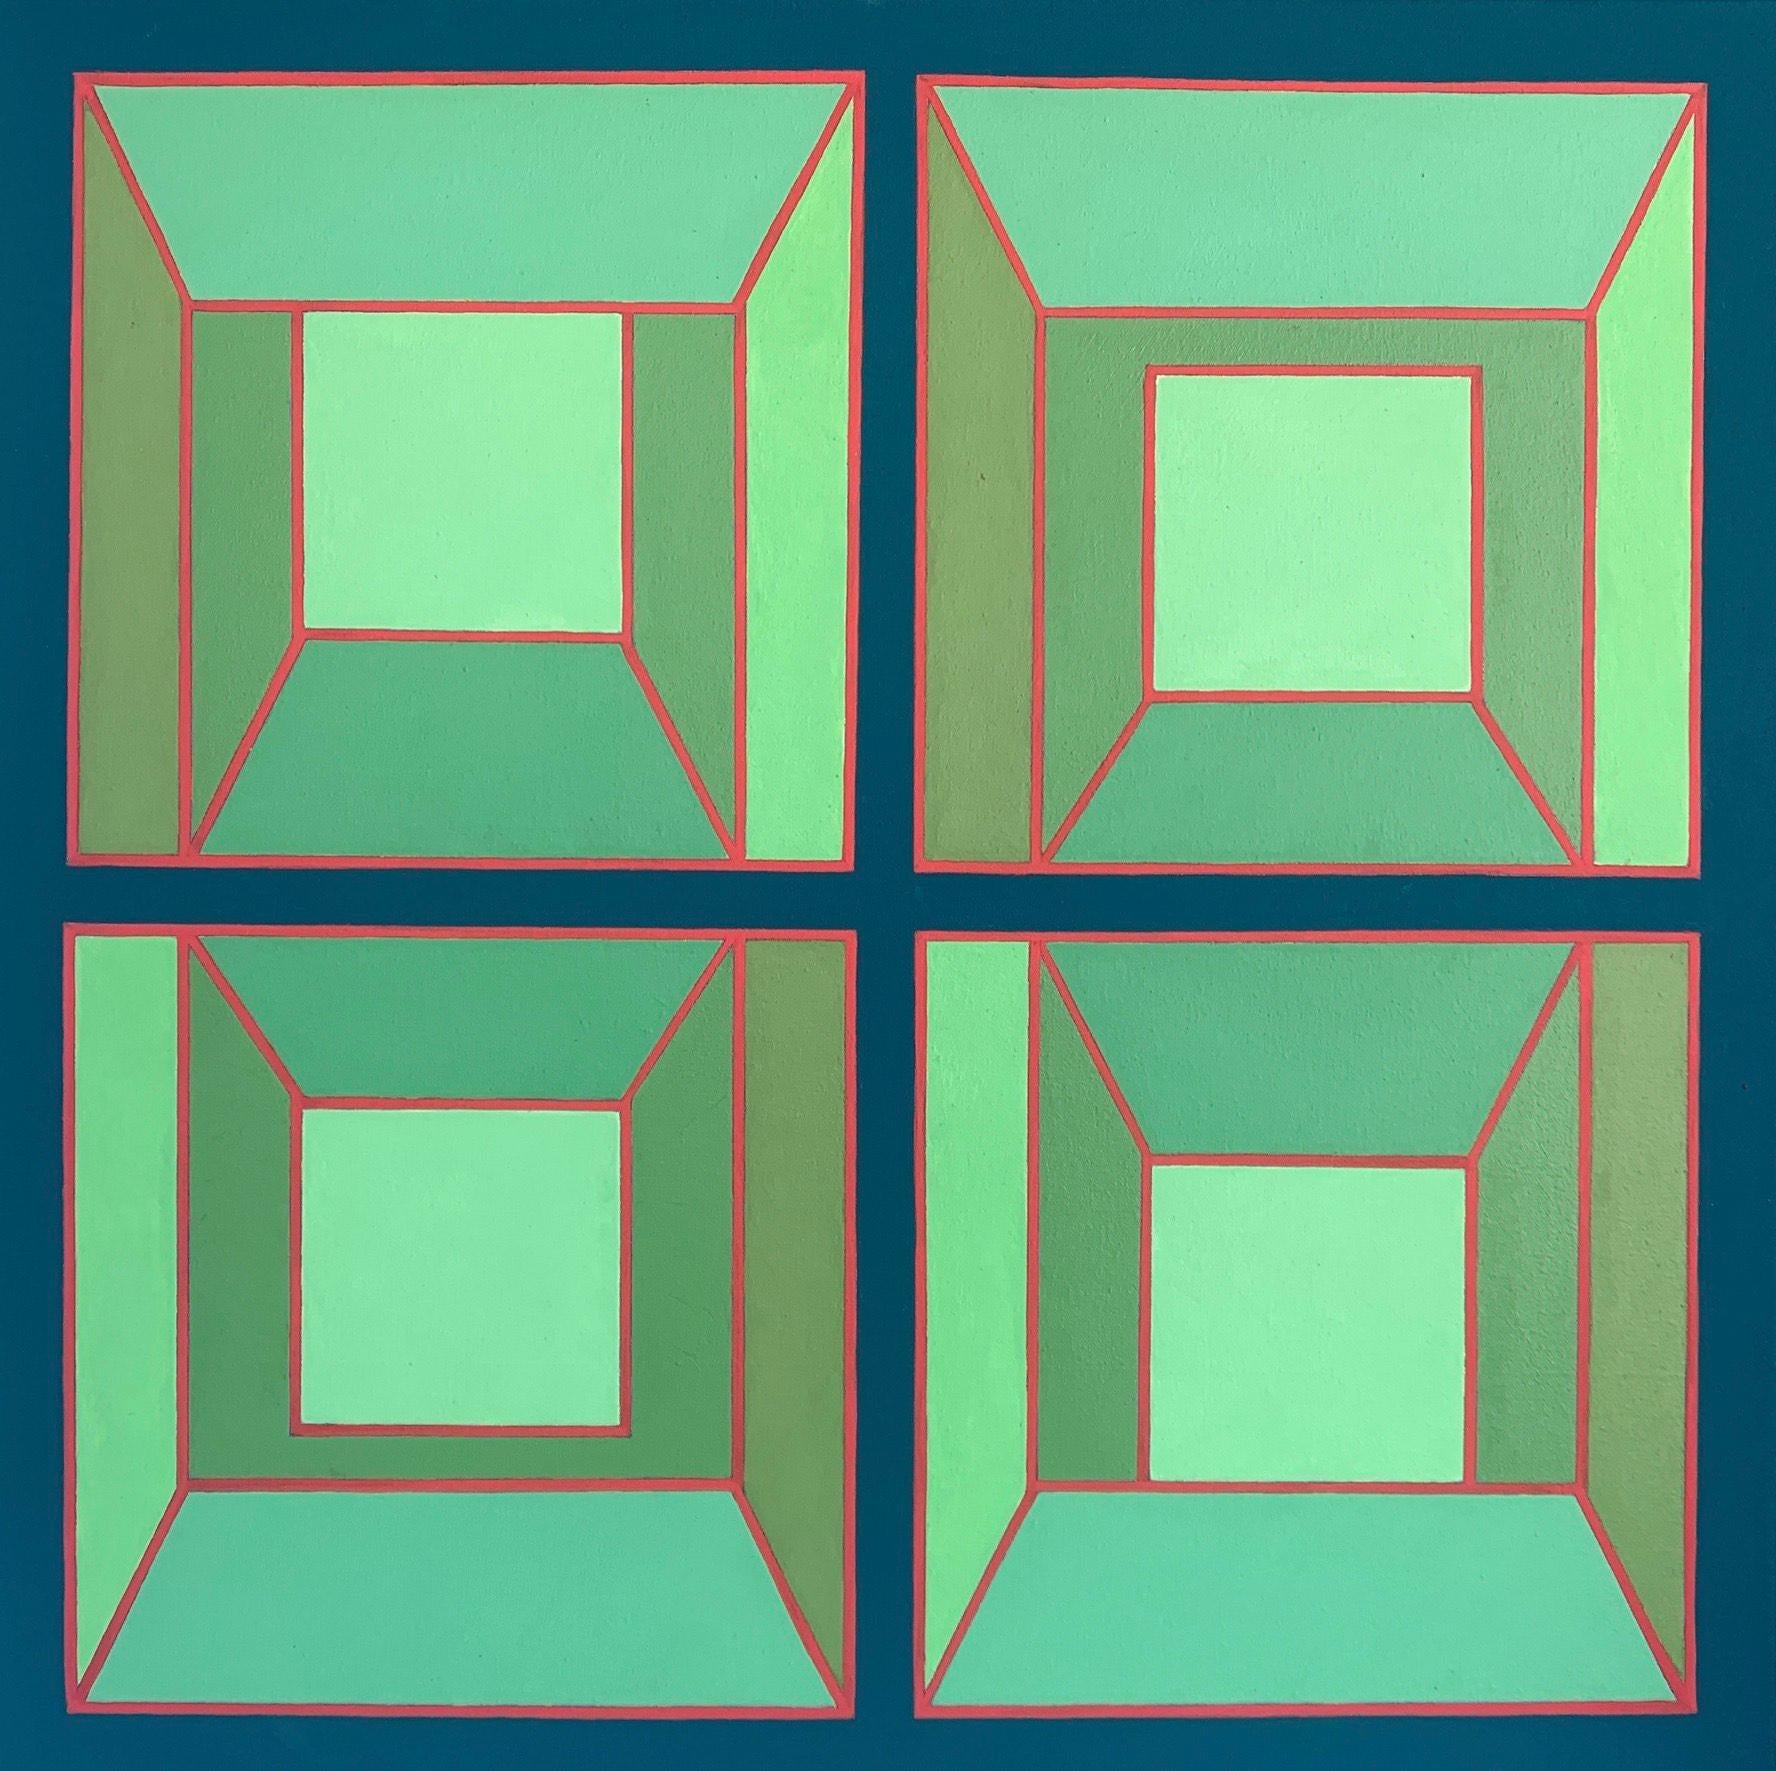 Benjamin Weaver Abstract Painting - Centerline #8: geometric abstract Op Art painting, green squares w/ blue & red